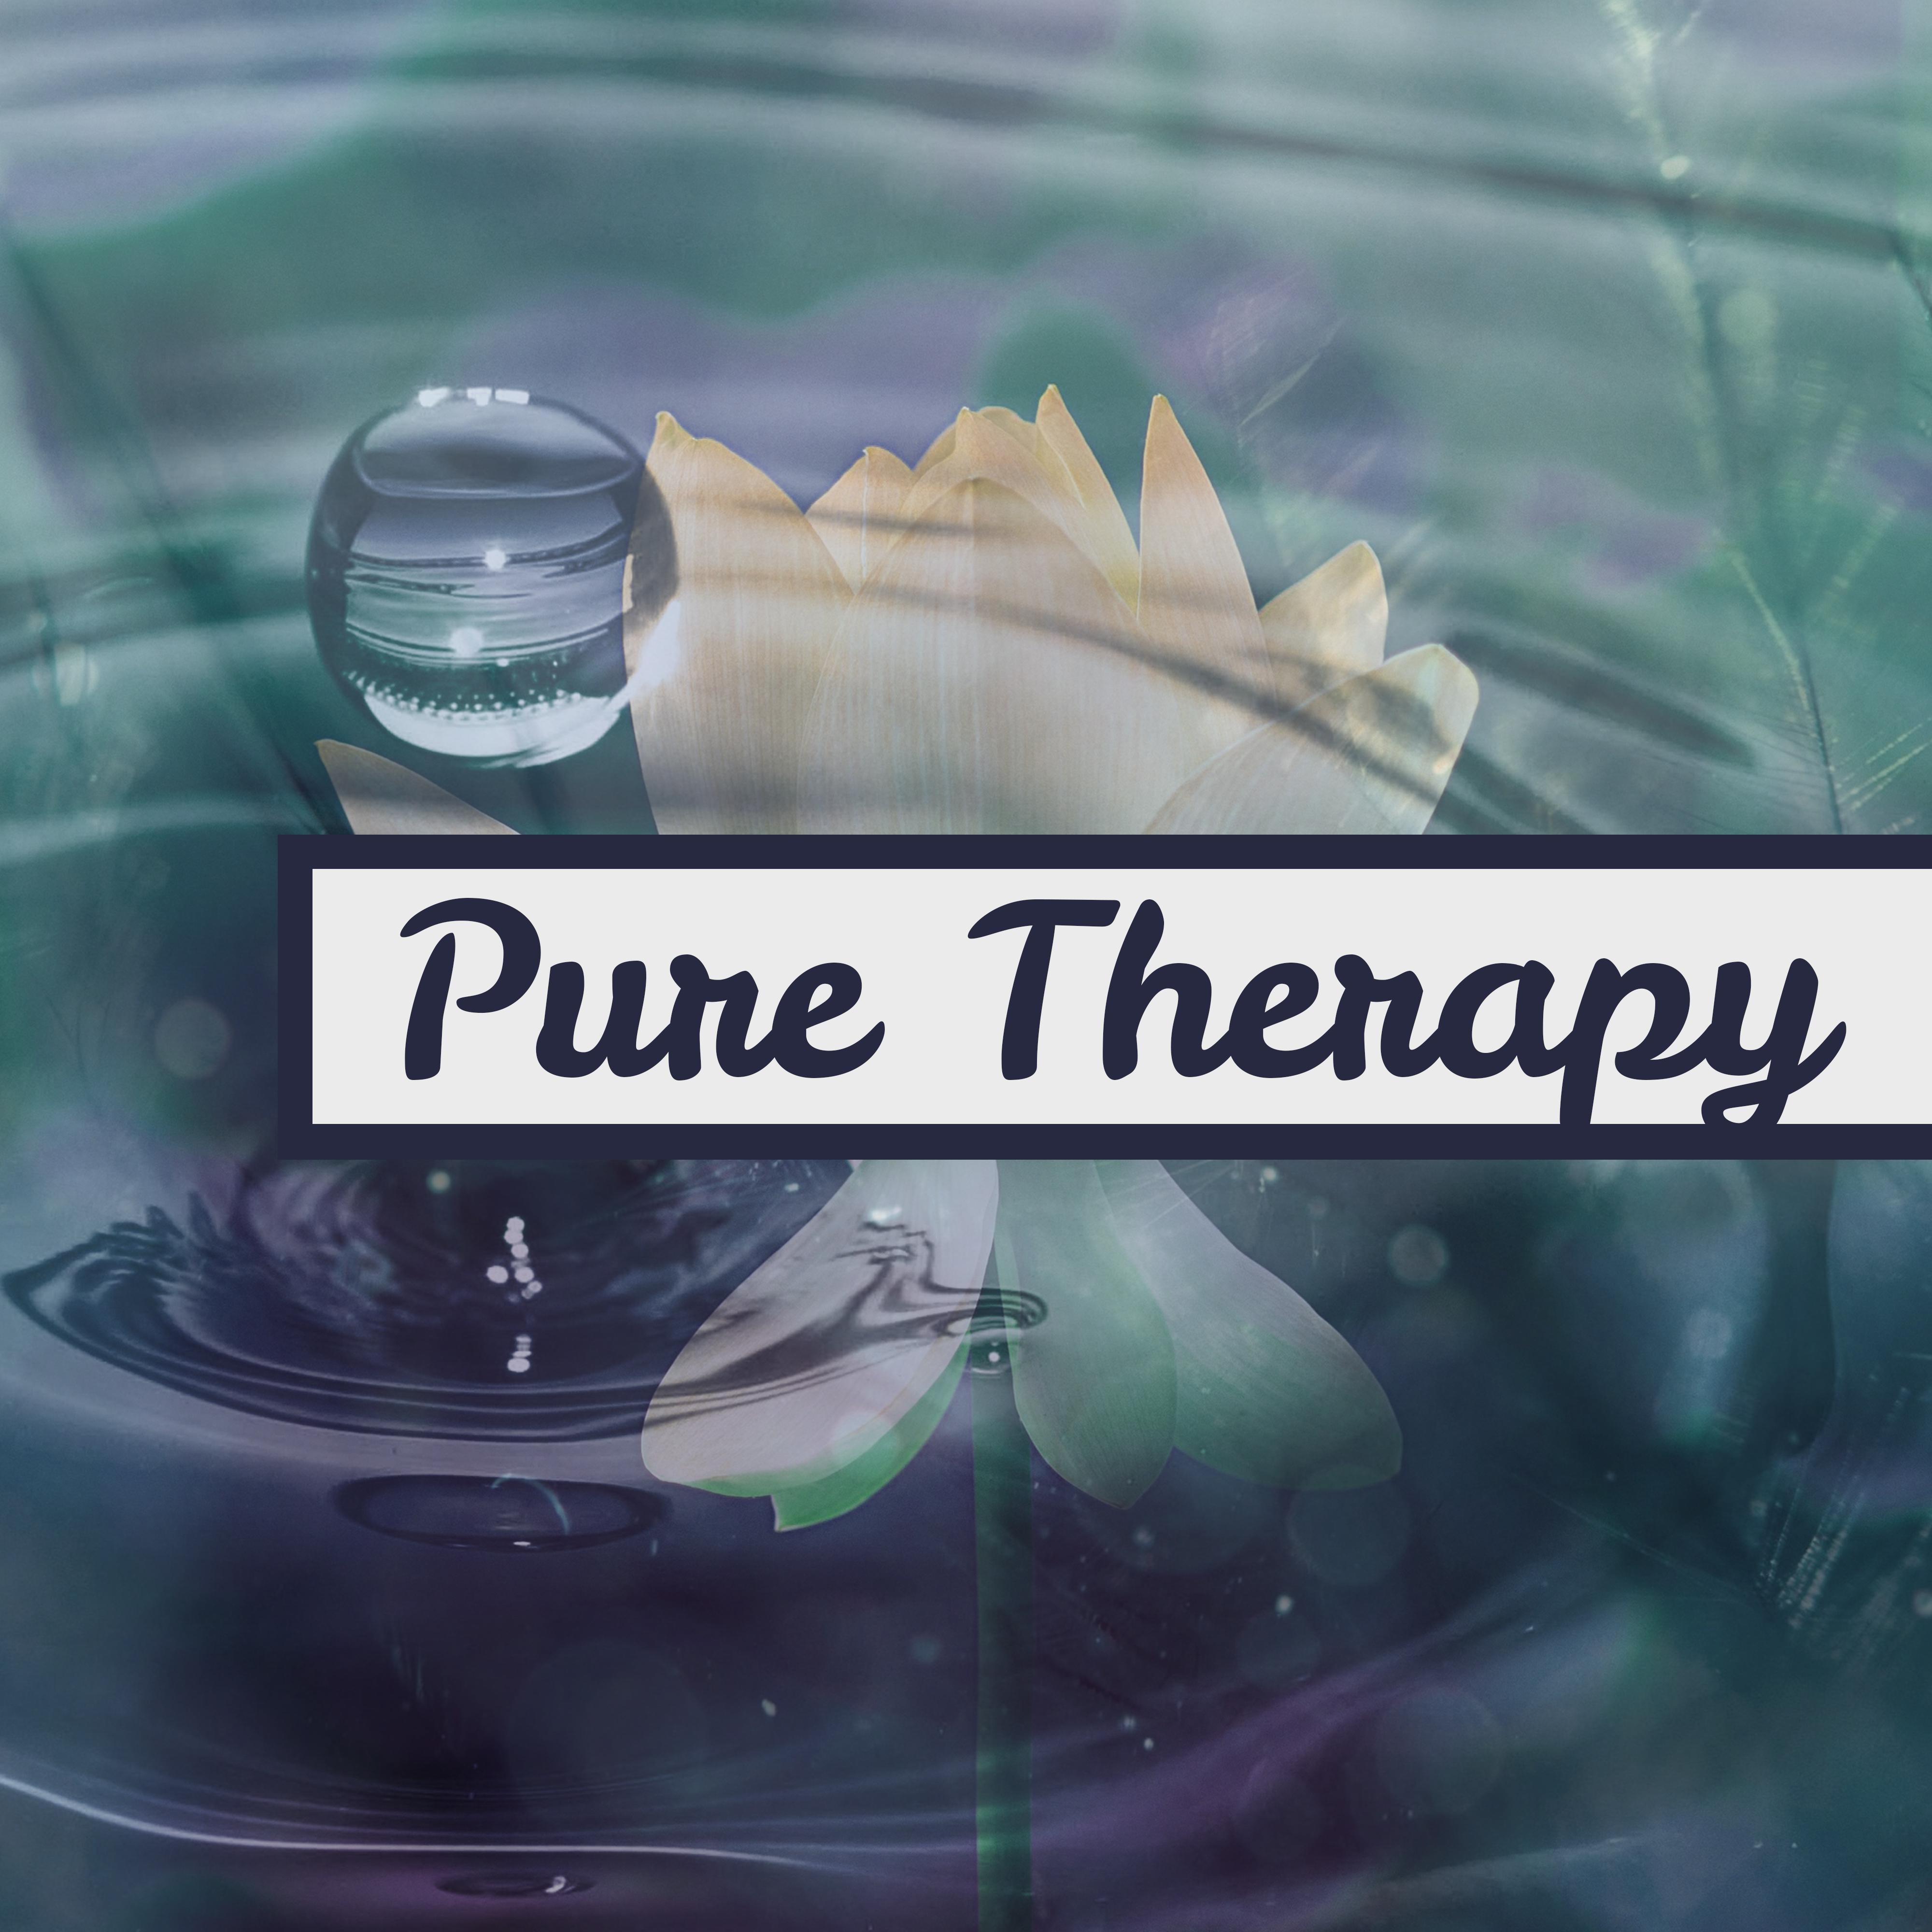 Pure Therapy – Spa Music, Peaceful Mind, Stress Free, Relaxing Waves, Nature Sounds for Massage, Wellness, Healing Music, Zen Meditation